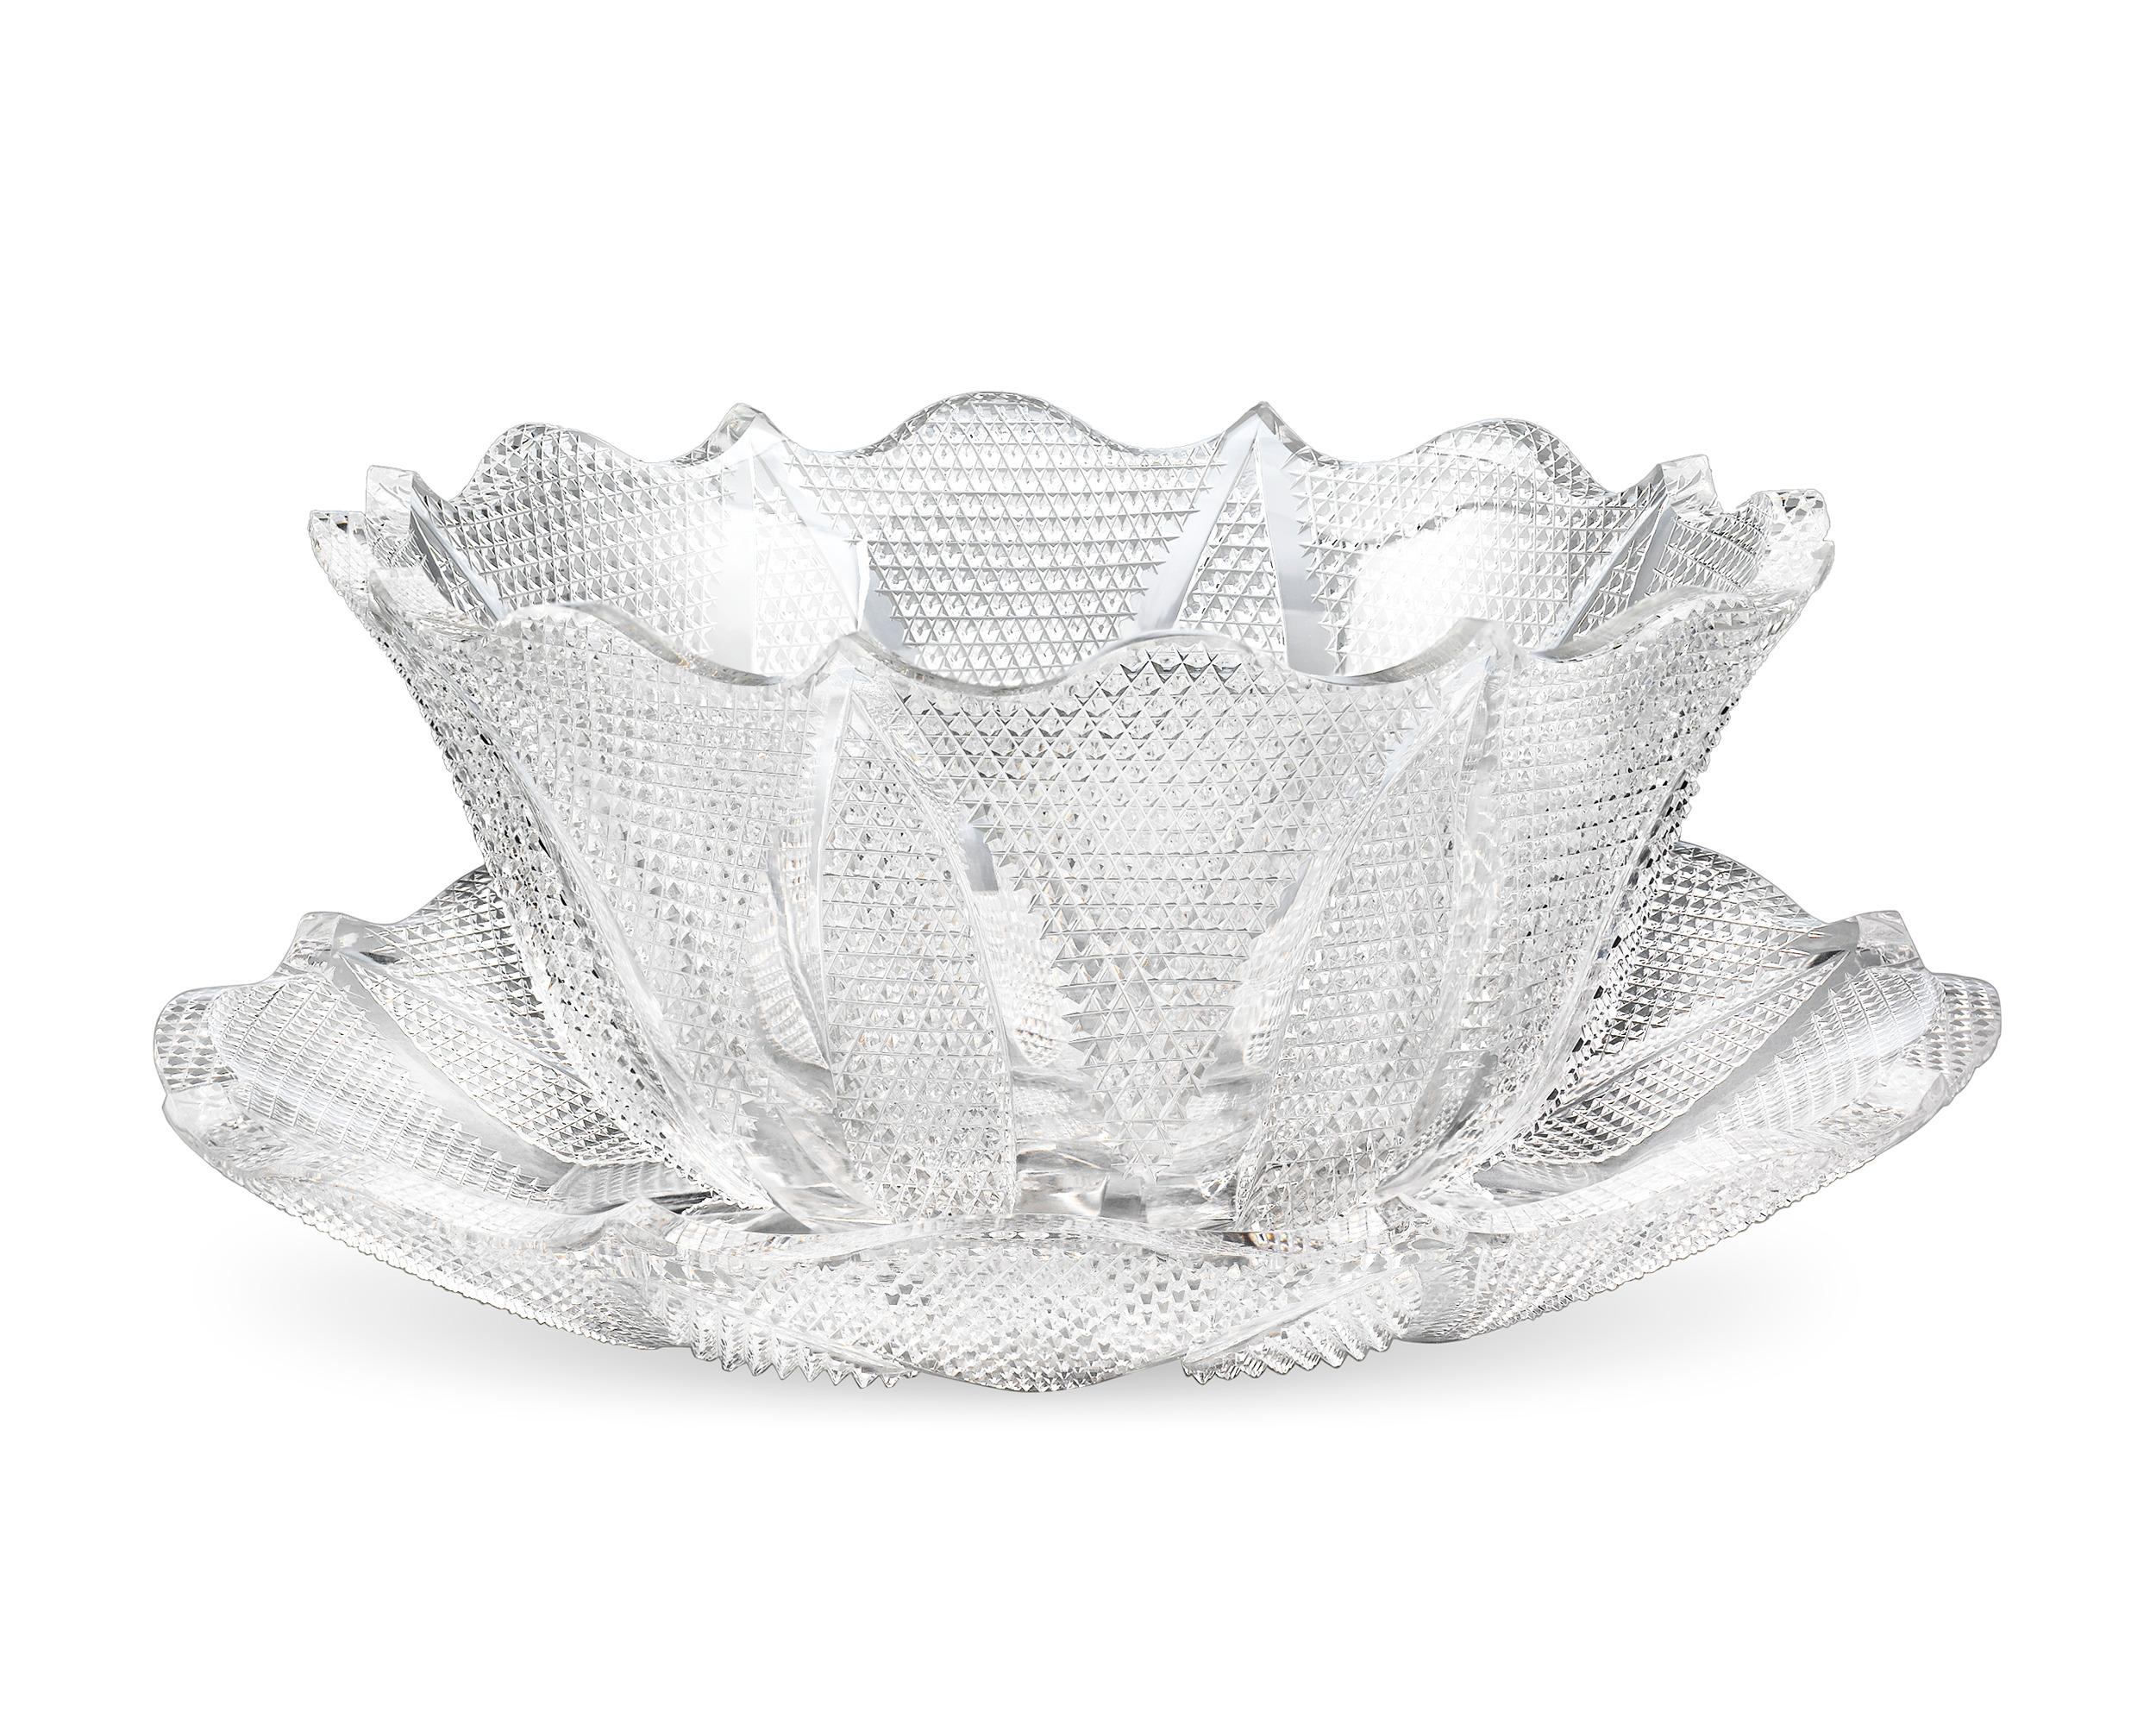 Comprised of a platter and serving bowl, this incredibly intricate salad set was crafted in the desirable Delphos pattern by the Libbey Glass Company. Stunning fields of diamonds are cut with immense precision, making this pattern one of the most